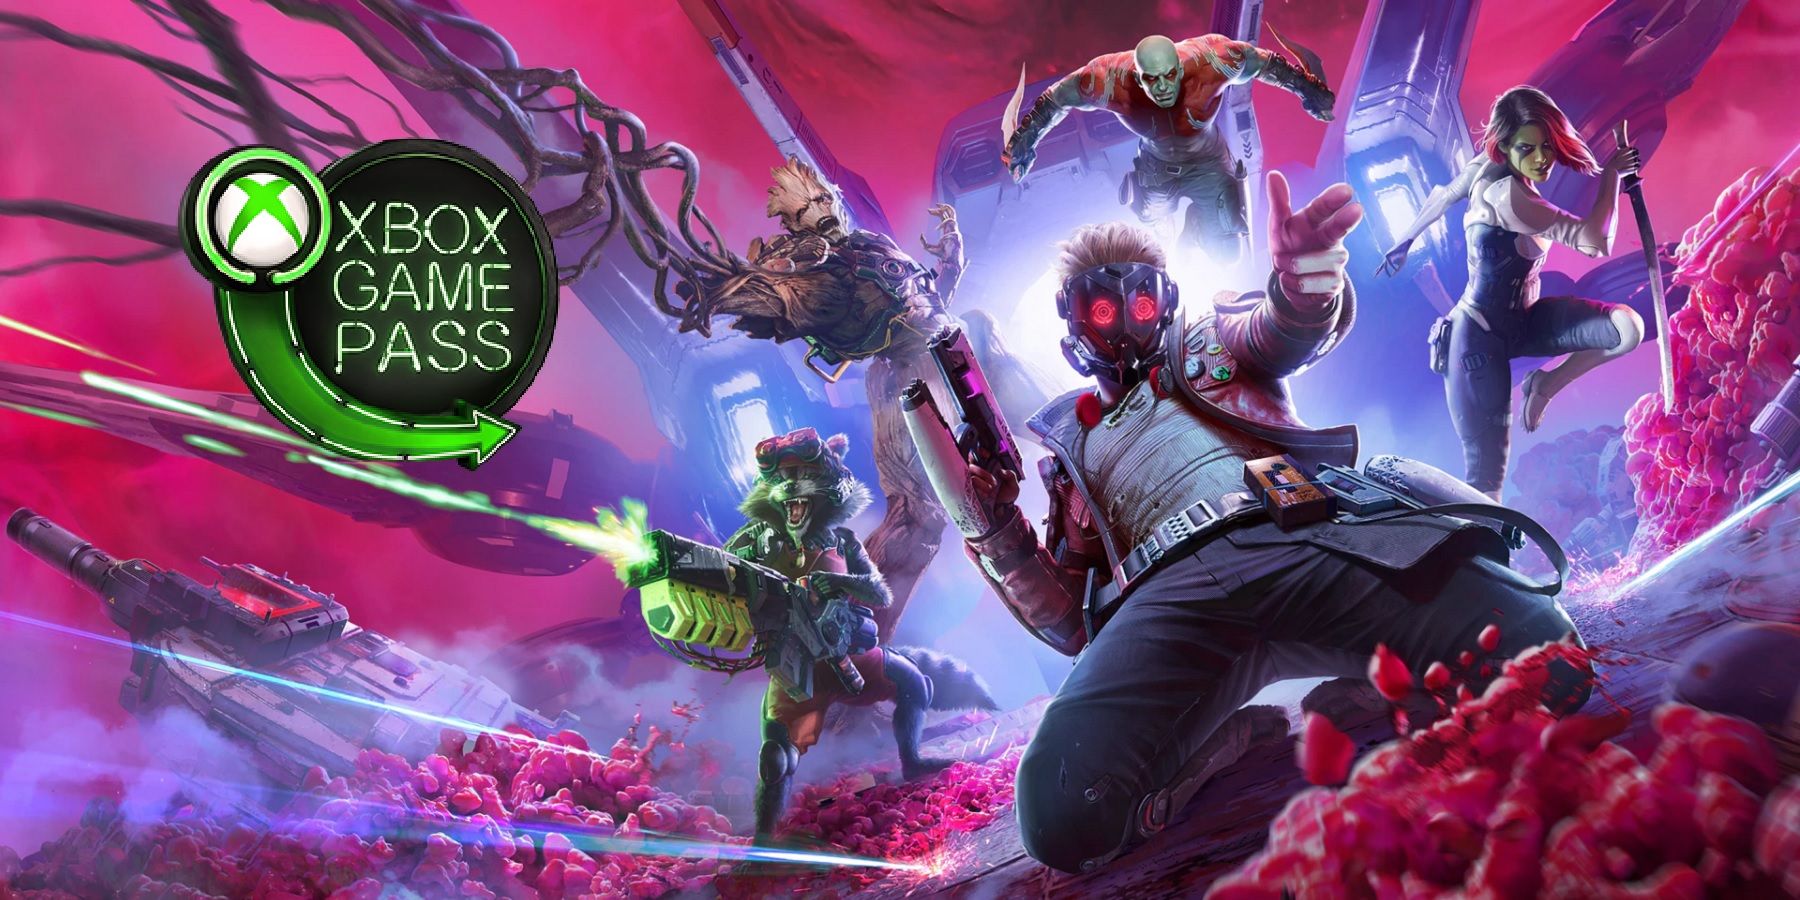 guardians of the galaxy with xbox game pass logo